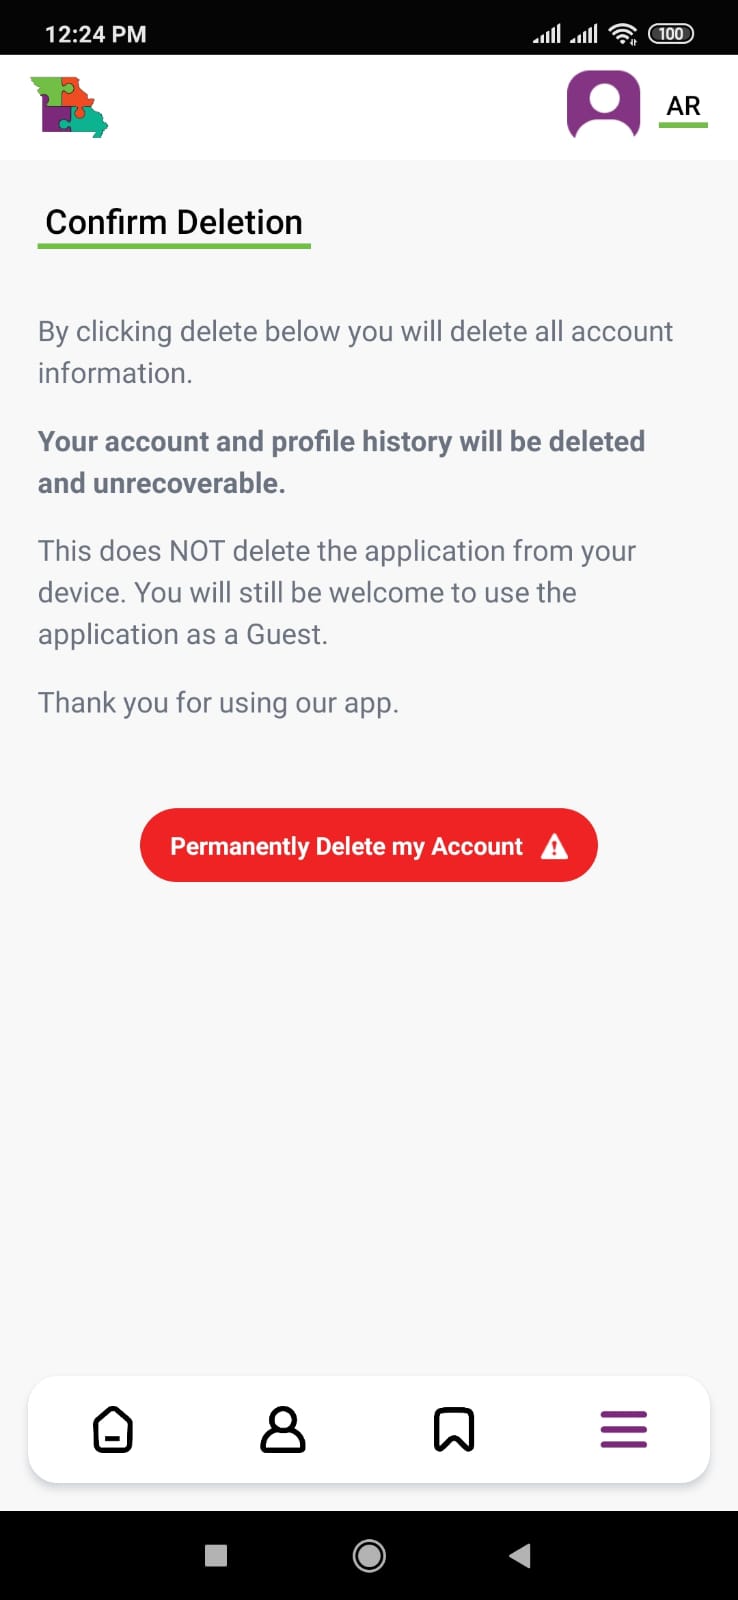 confirm deletion screen